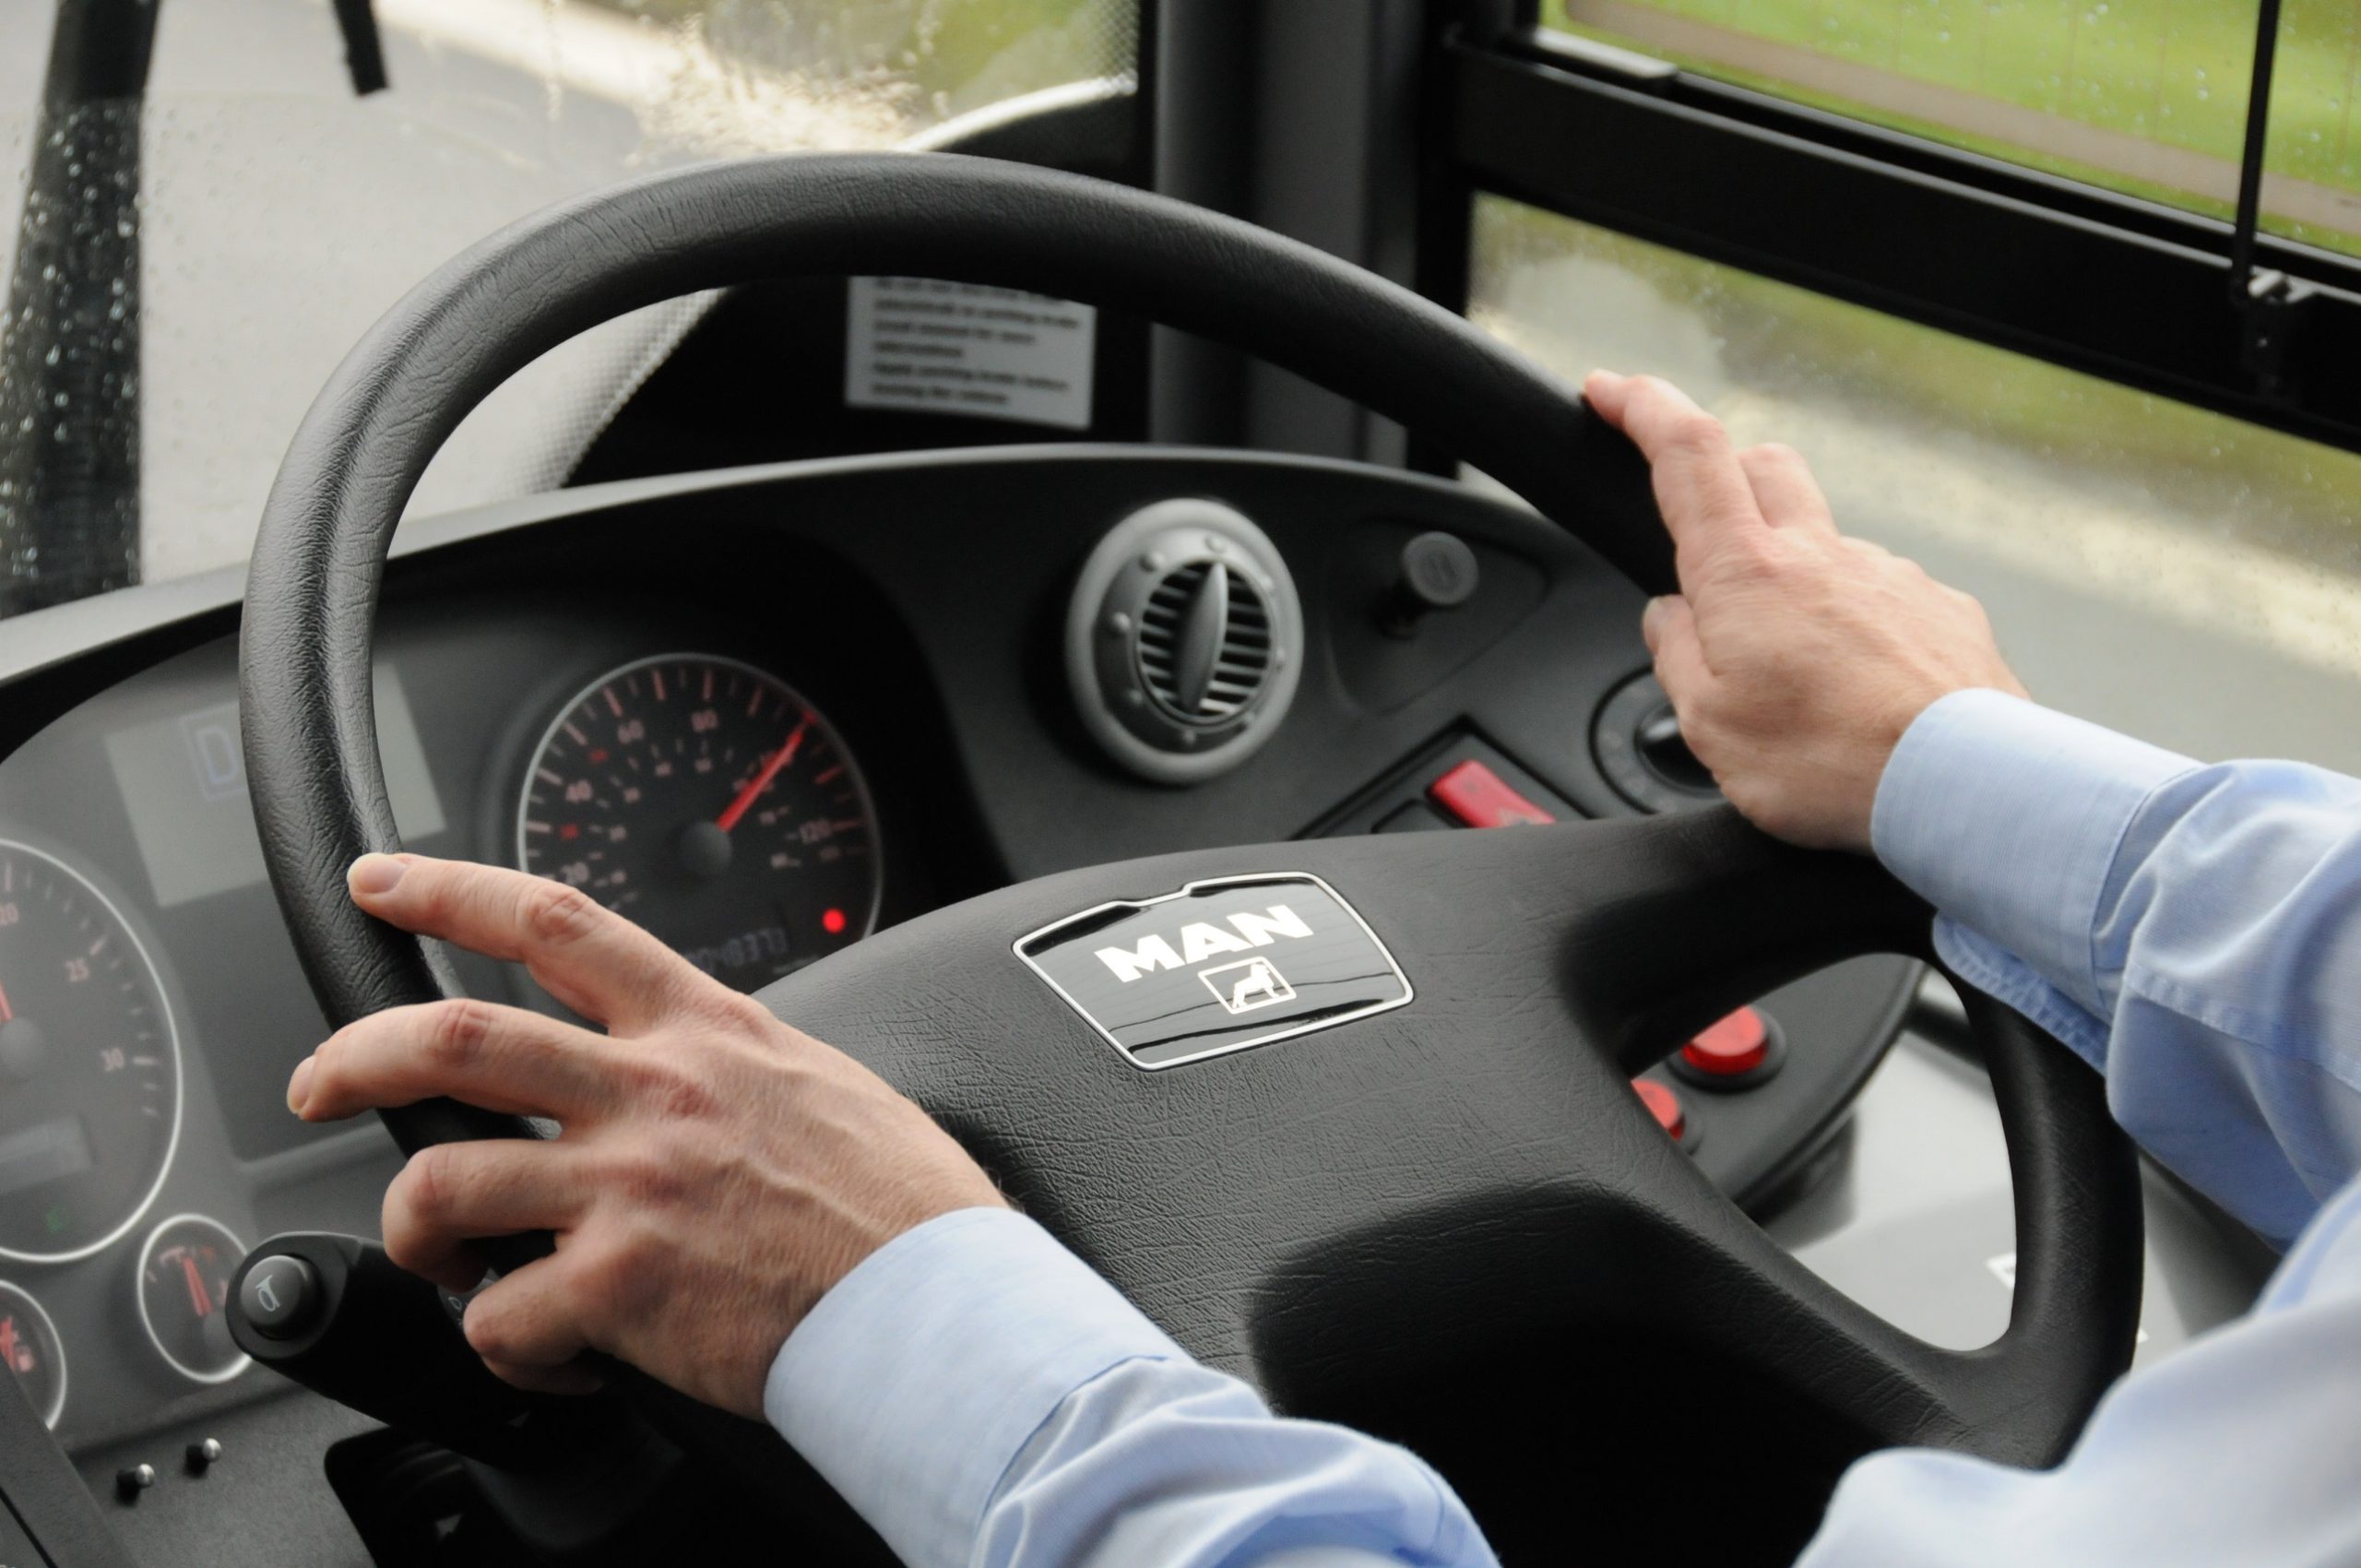 50km young PCV driver restriction appropriateness questioned